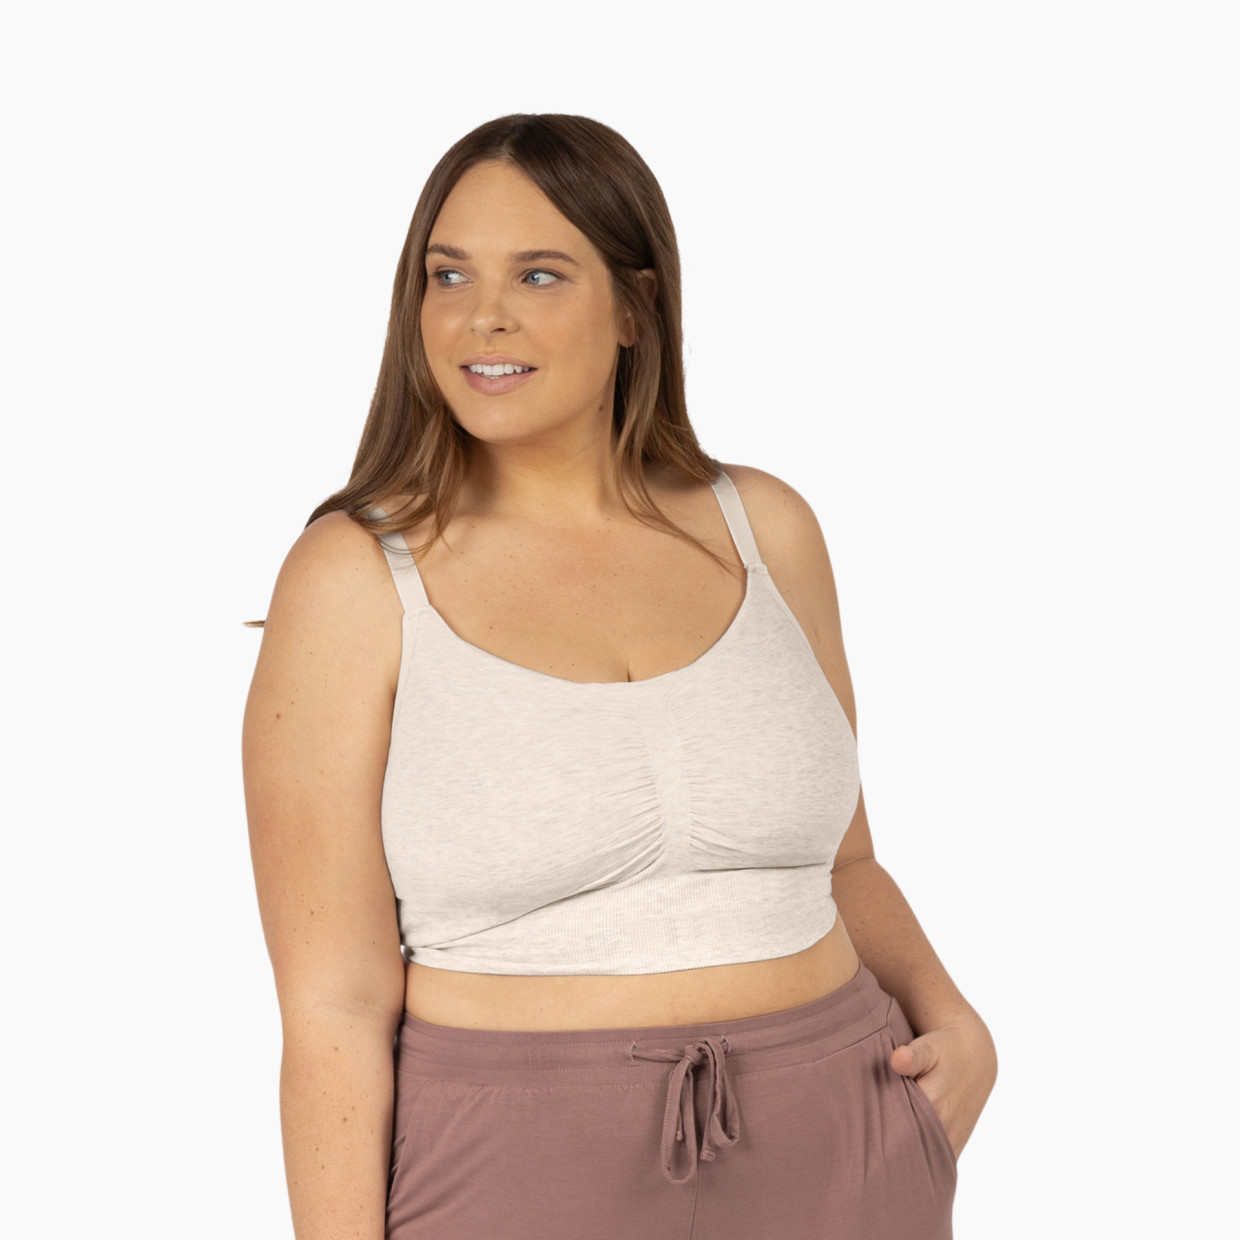 Kindred Bravely Sublime Bamboo Hands-Free Pumping Lounge & Sleep Bra - Oatmeal Heather, Medium.